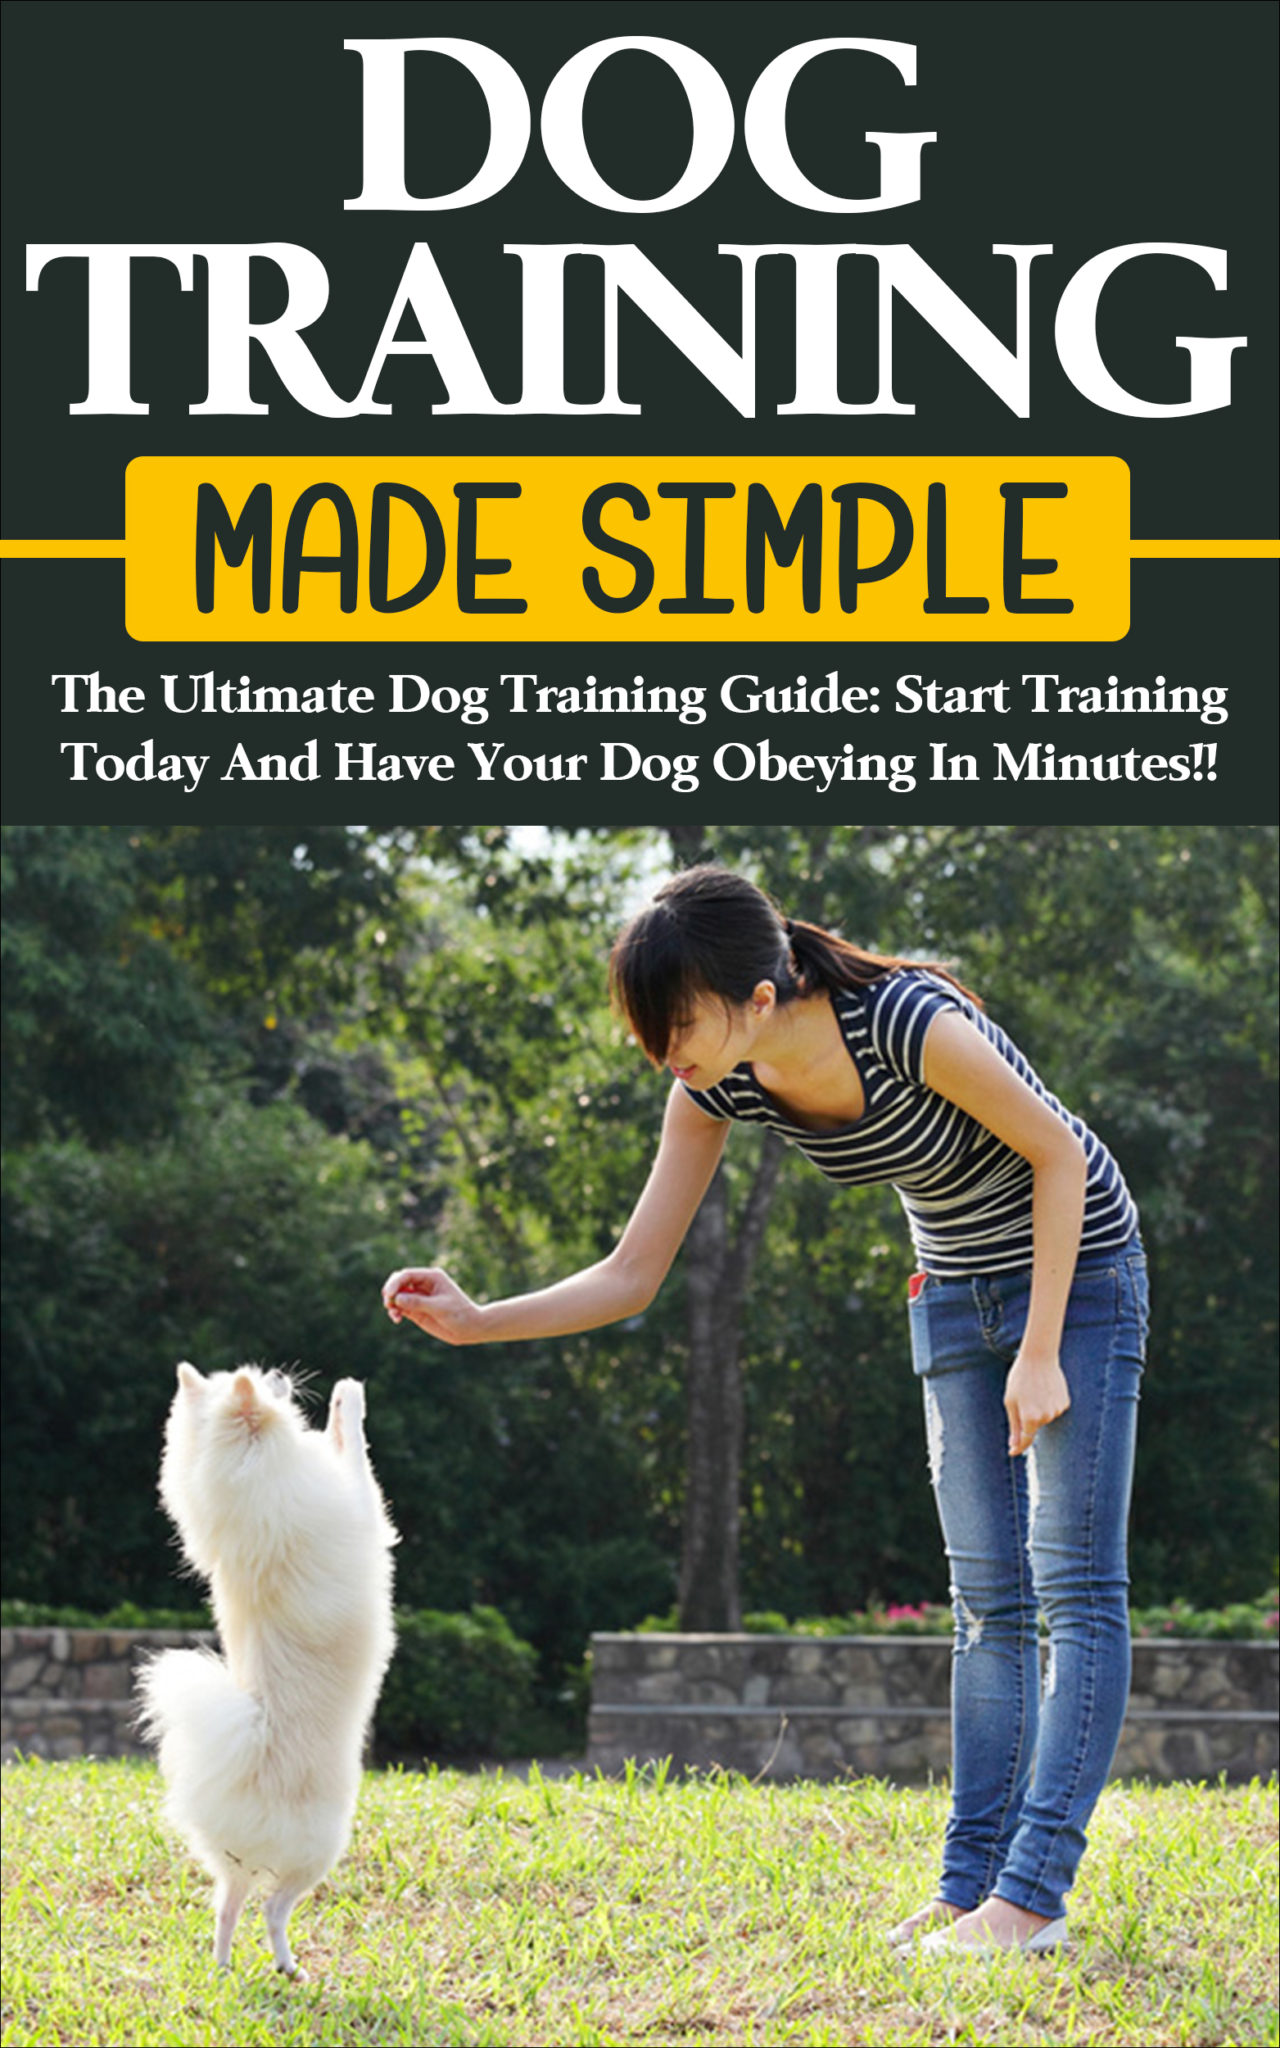 FREE: Dog Training Made Simple: The Ultimate Dog Training Guide by John Anthony